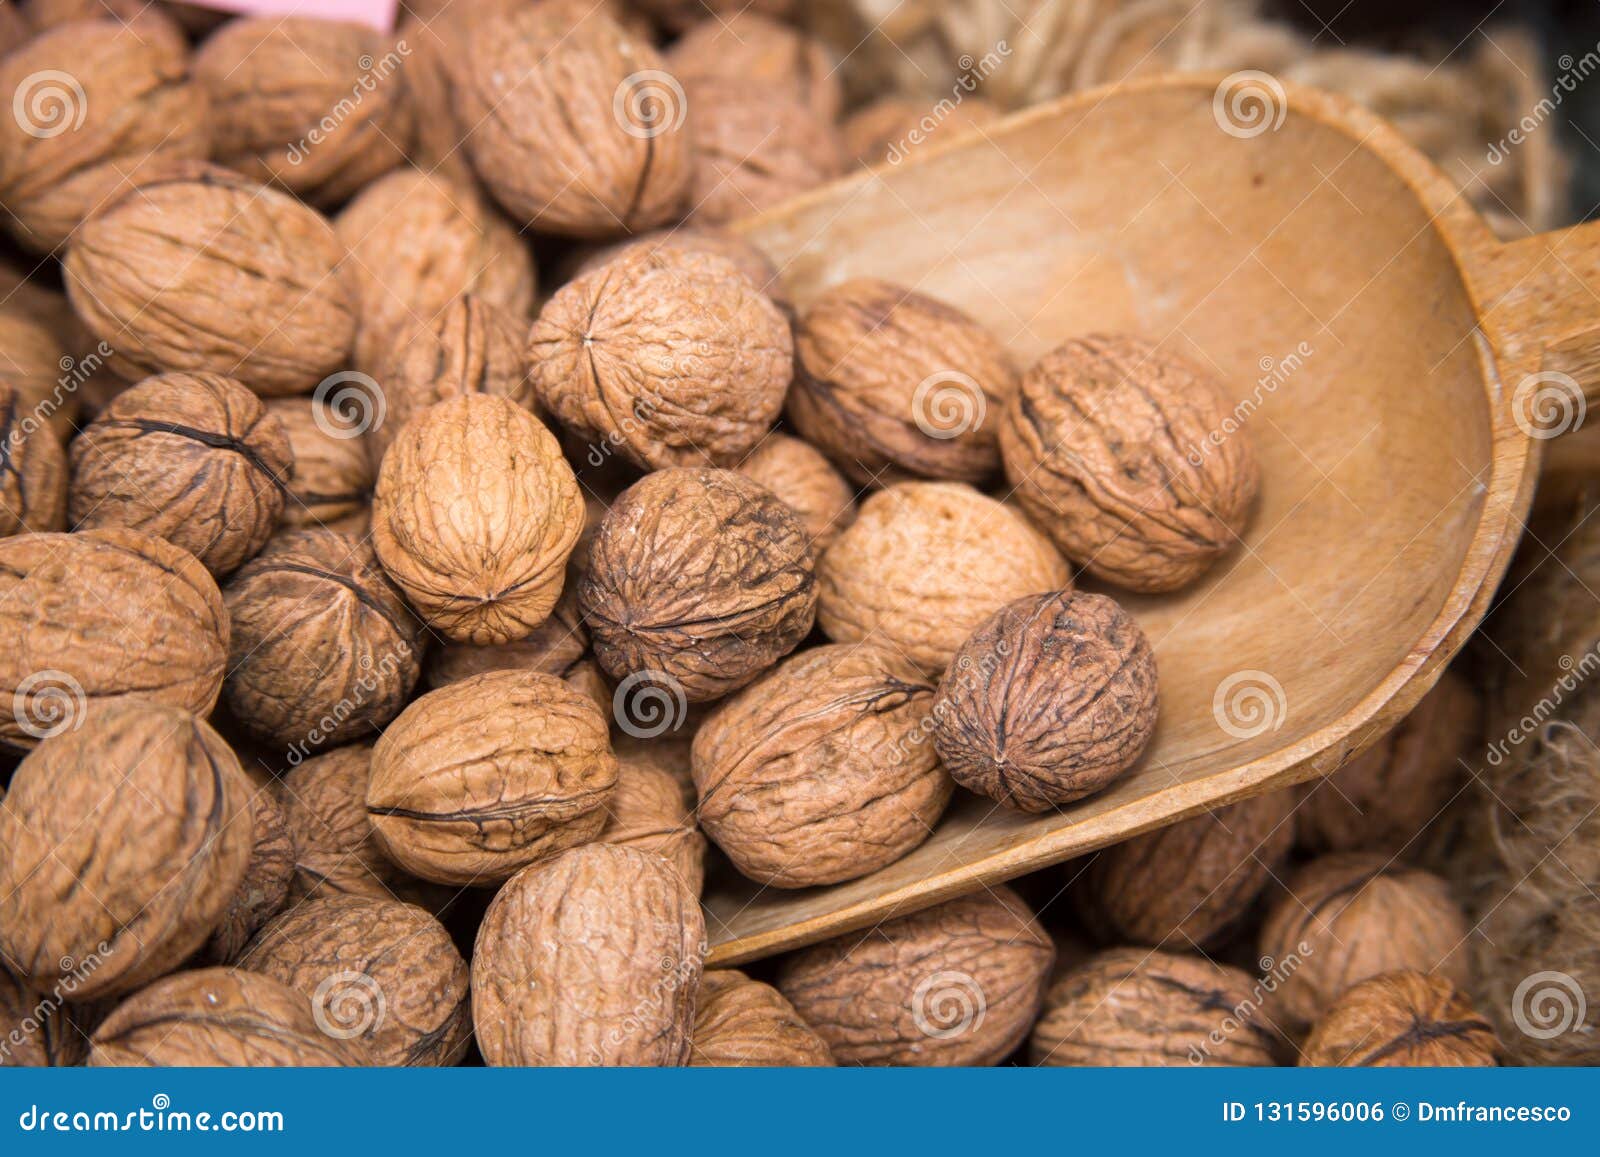 walnut typical products of emilia romagna